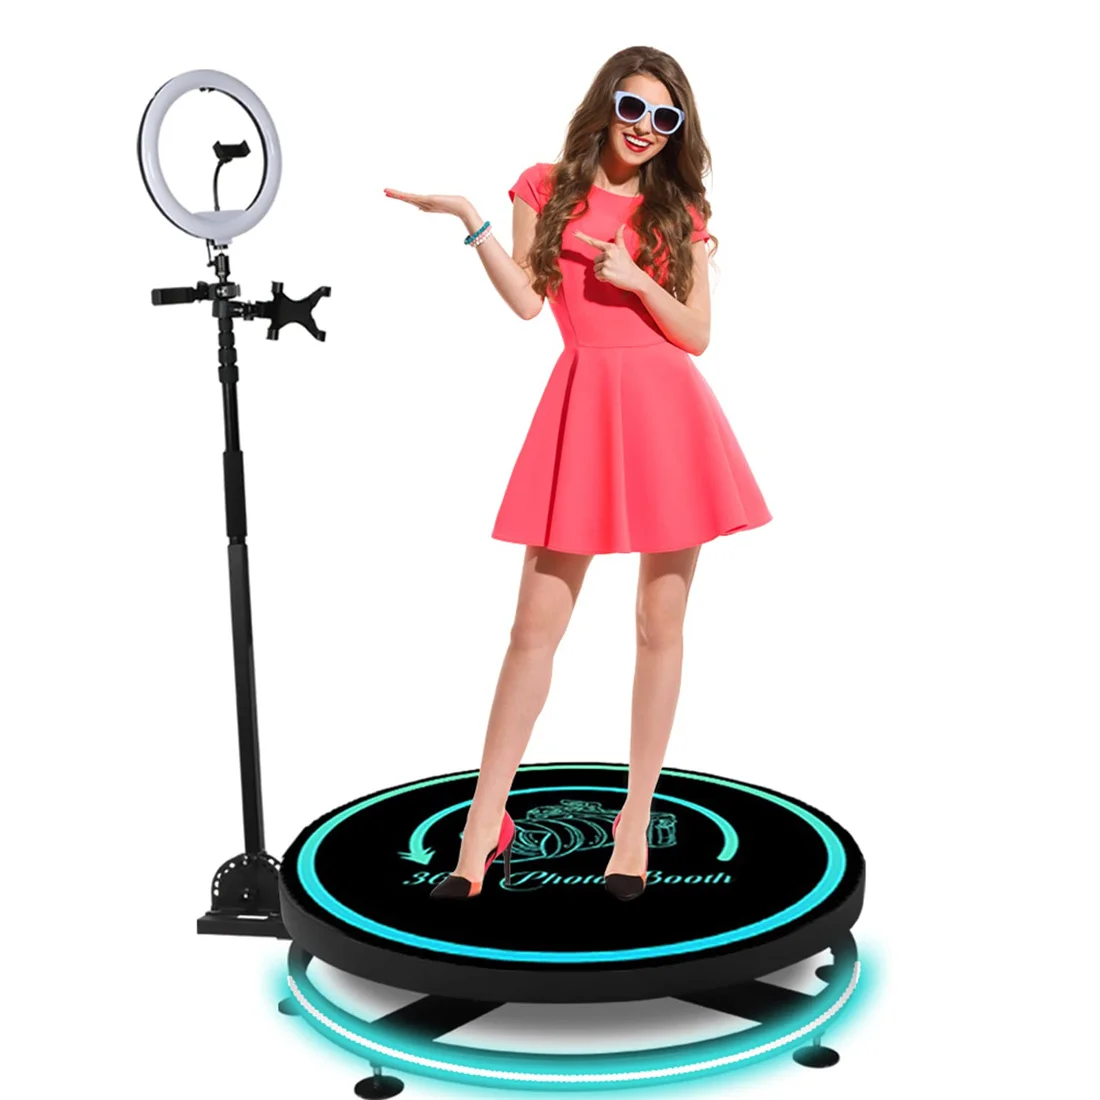 360 Photo Booth Machine for Party Slow Motion Video Booths Selfie Platform Spinning Photobooth Camera Video Machine for Wedding